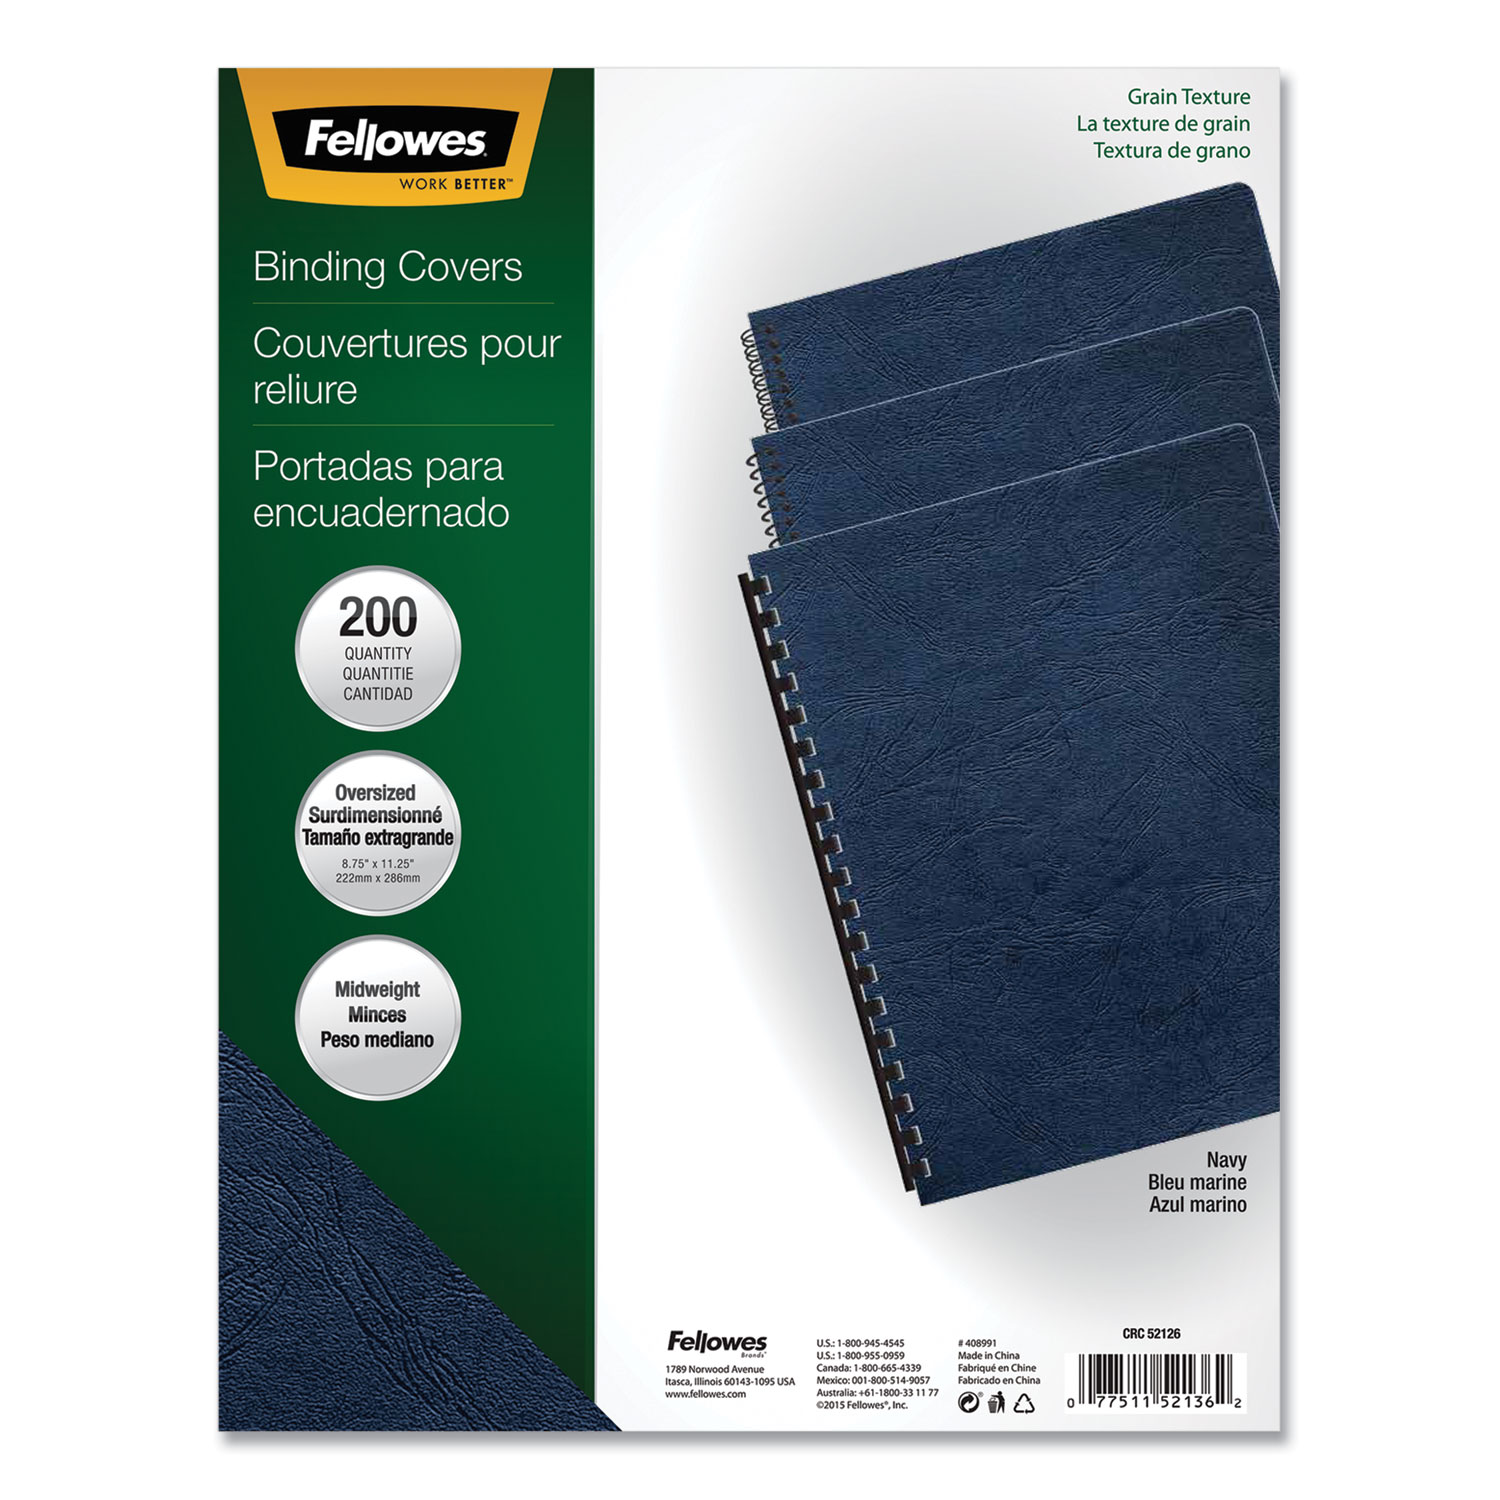  Cholemy 100 Pcs 12 Mil 90 lb Binding Covers 11 x 17 Inches  Binding Presentation Covers Leather Grain Book Binding Paper Quality  Leather Texture Paper for Office School Business Reports Proposals : Office  Products